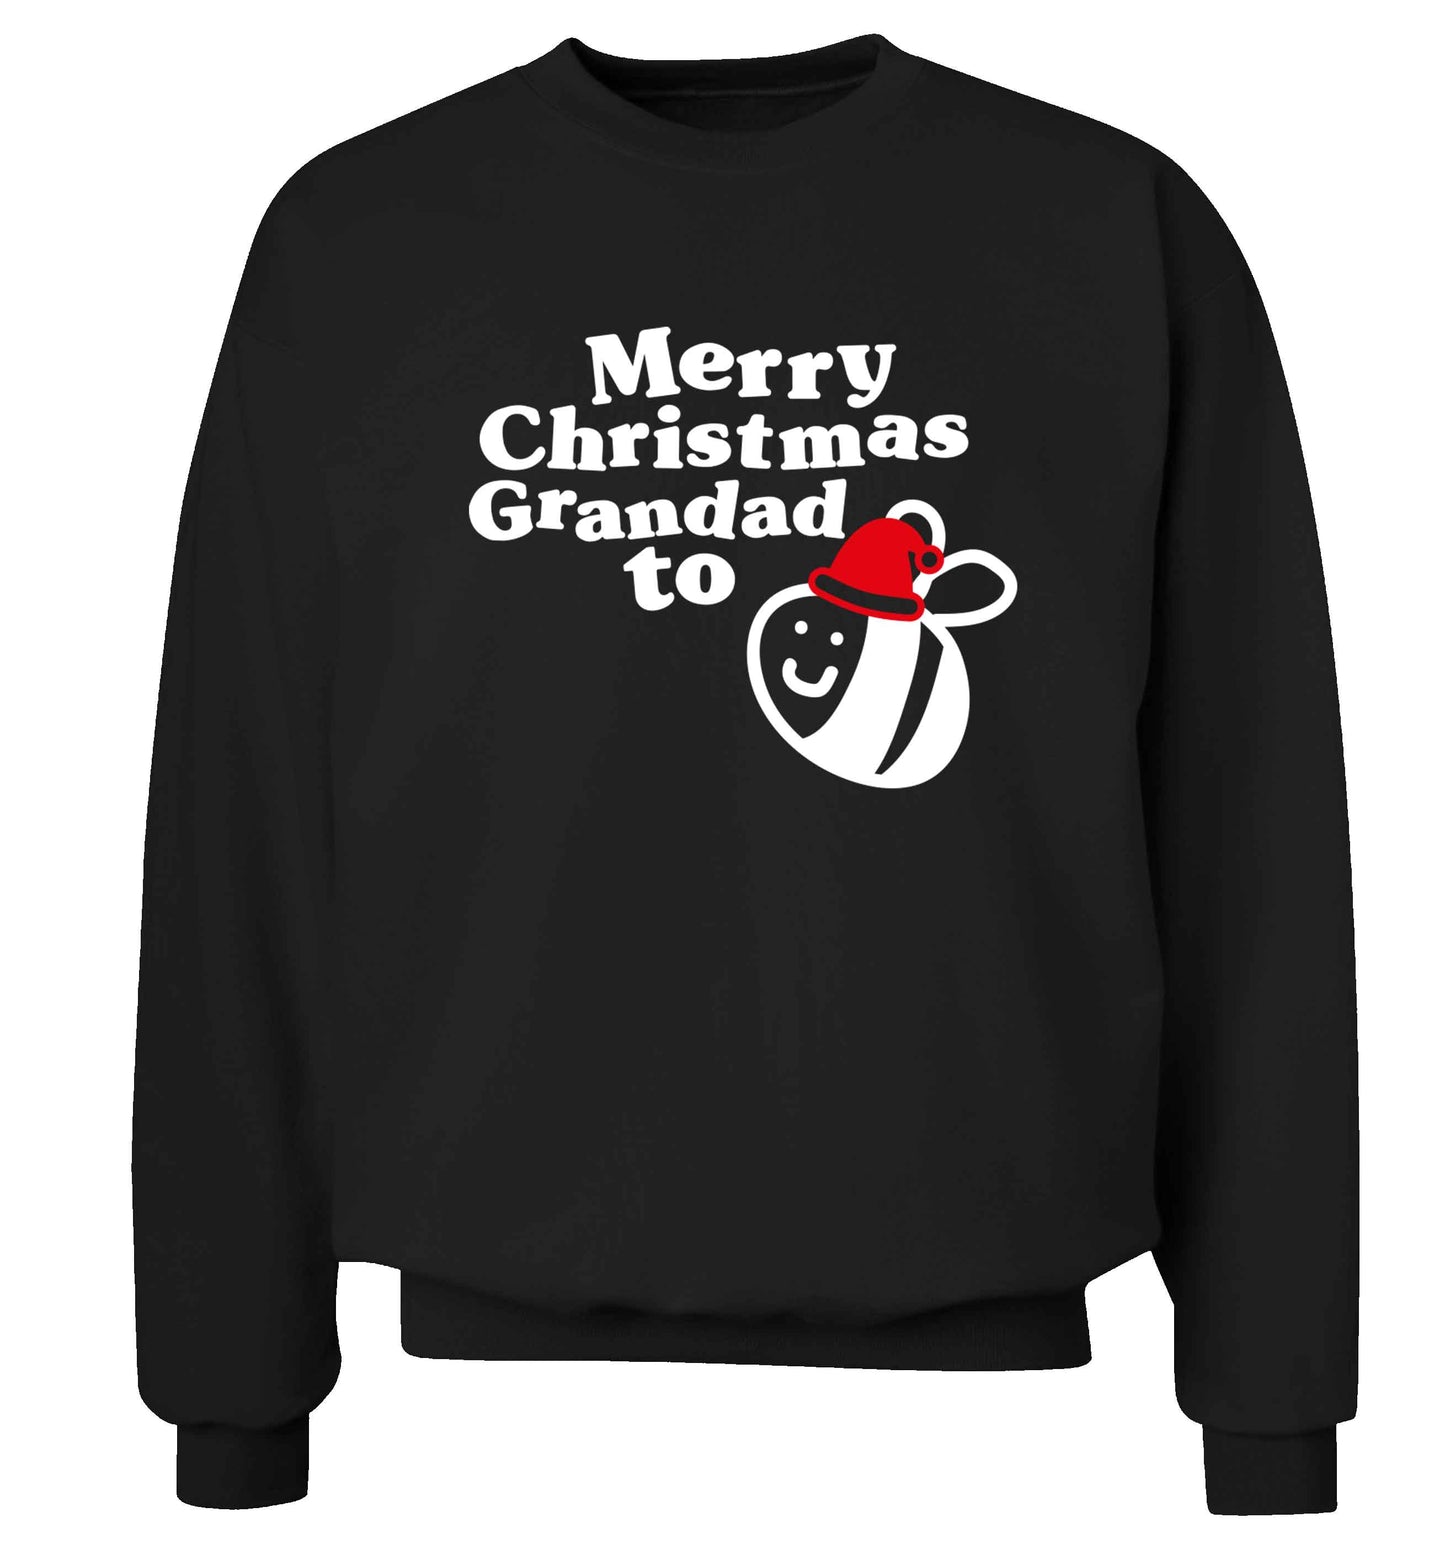 Merry Christmas grandad to be Adult's unisex black Sweater 2XL